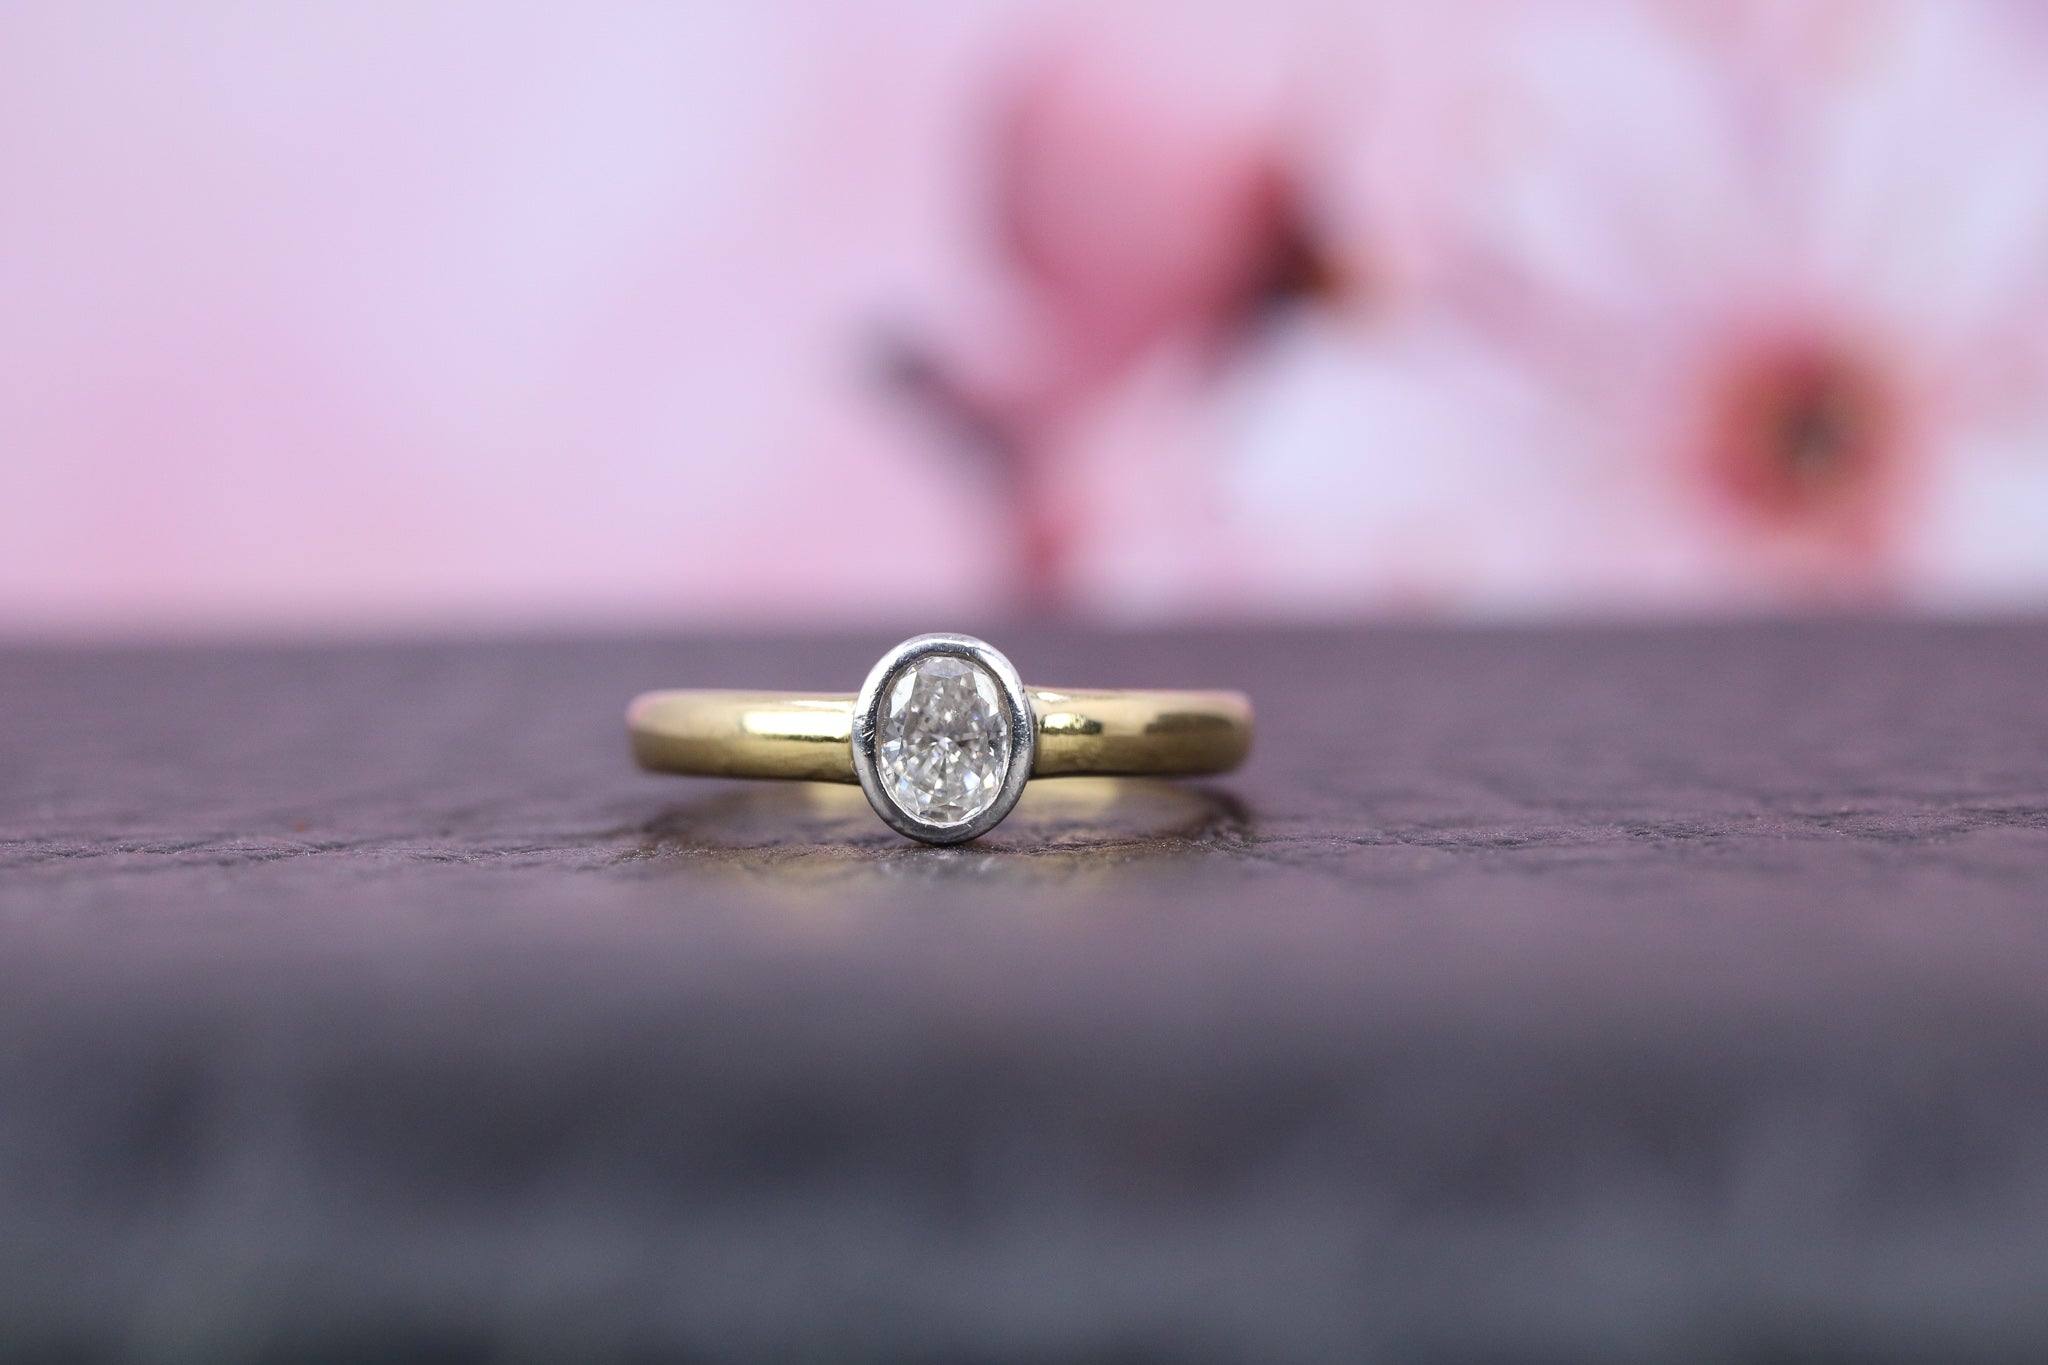 18ct Yellow Gold & Diamond Ring - W6047 - Hallmark Jewellers Formby & The Jewellers Bench Widnes